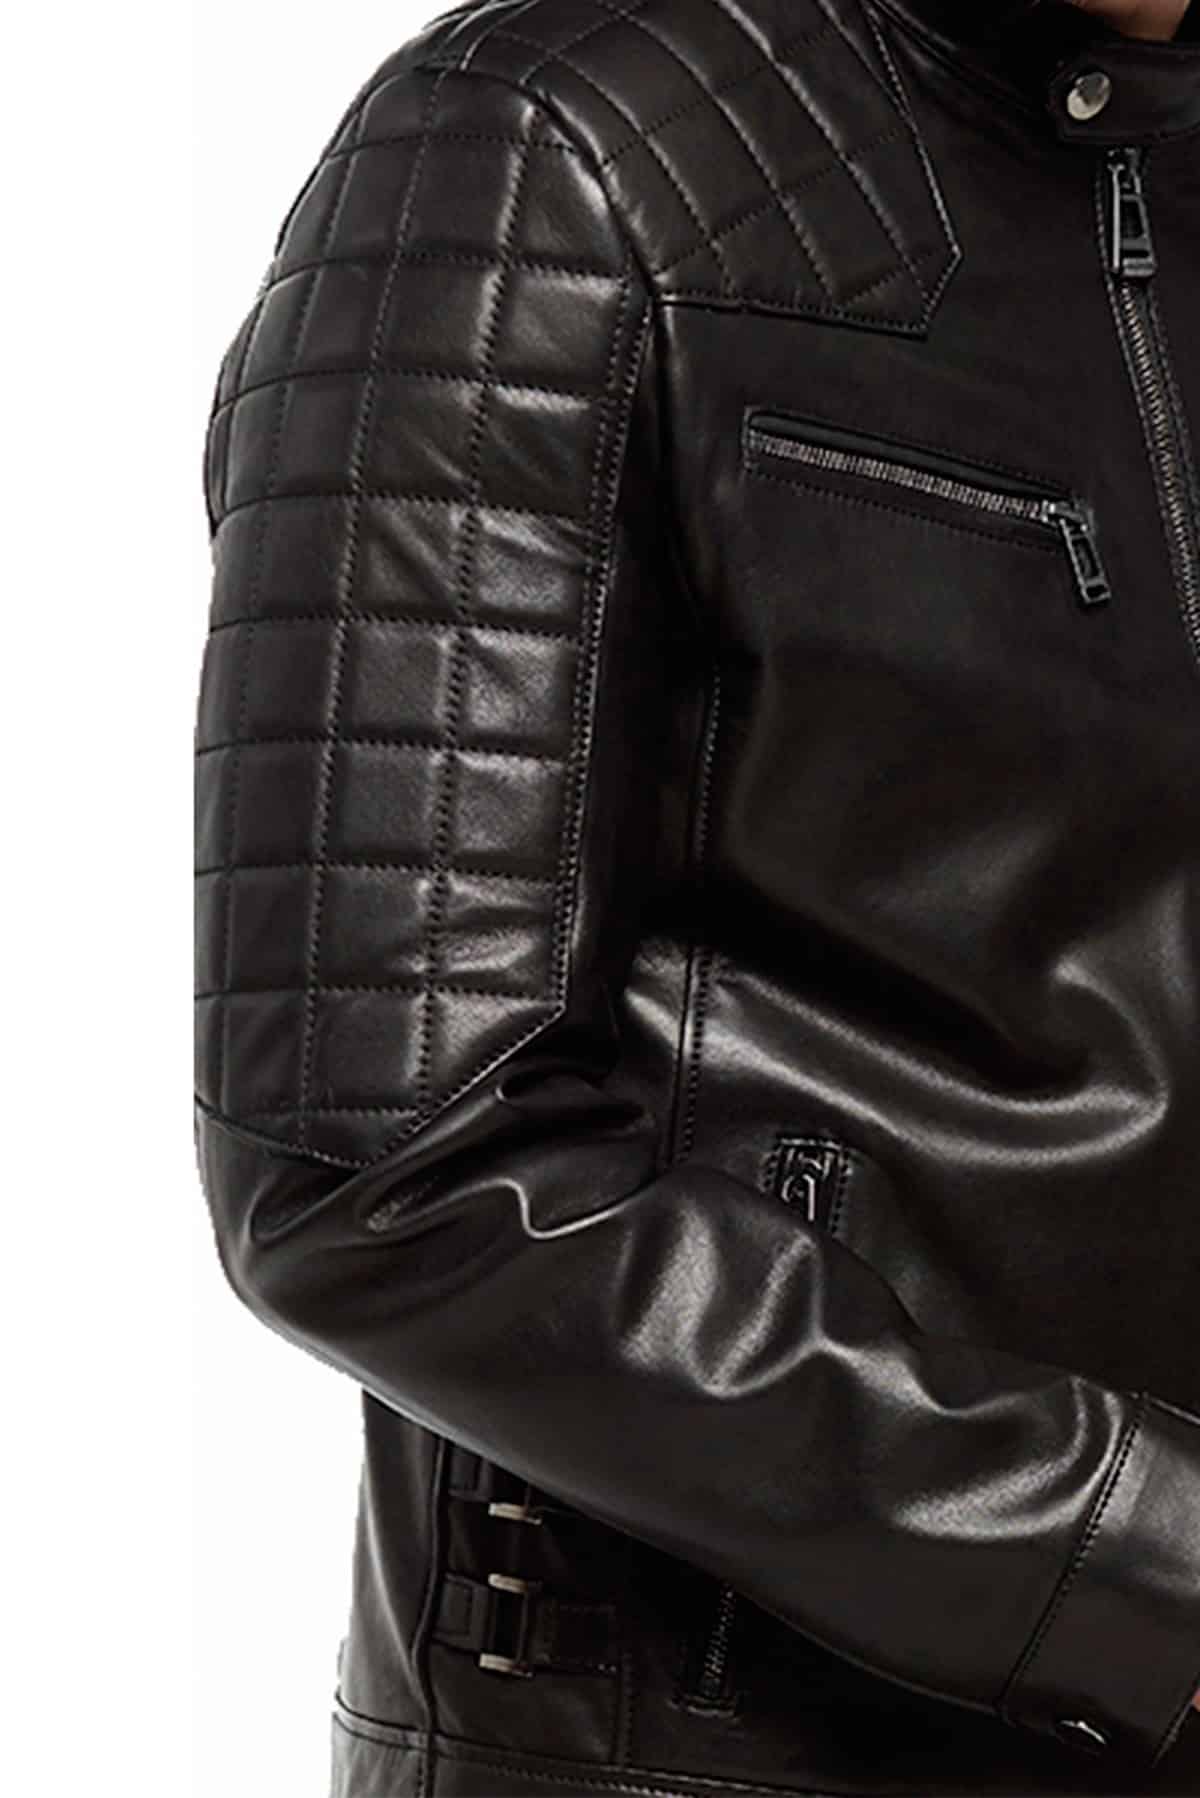 Black Quilted Leather Jacket - Buy Mens Fashion in Australia